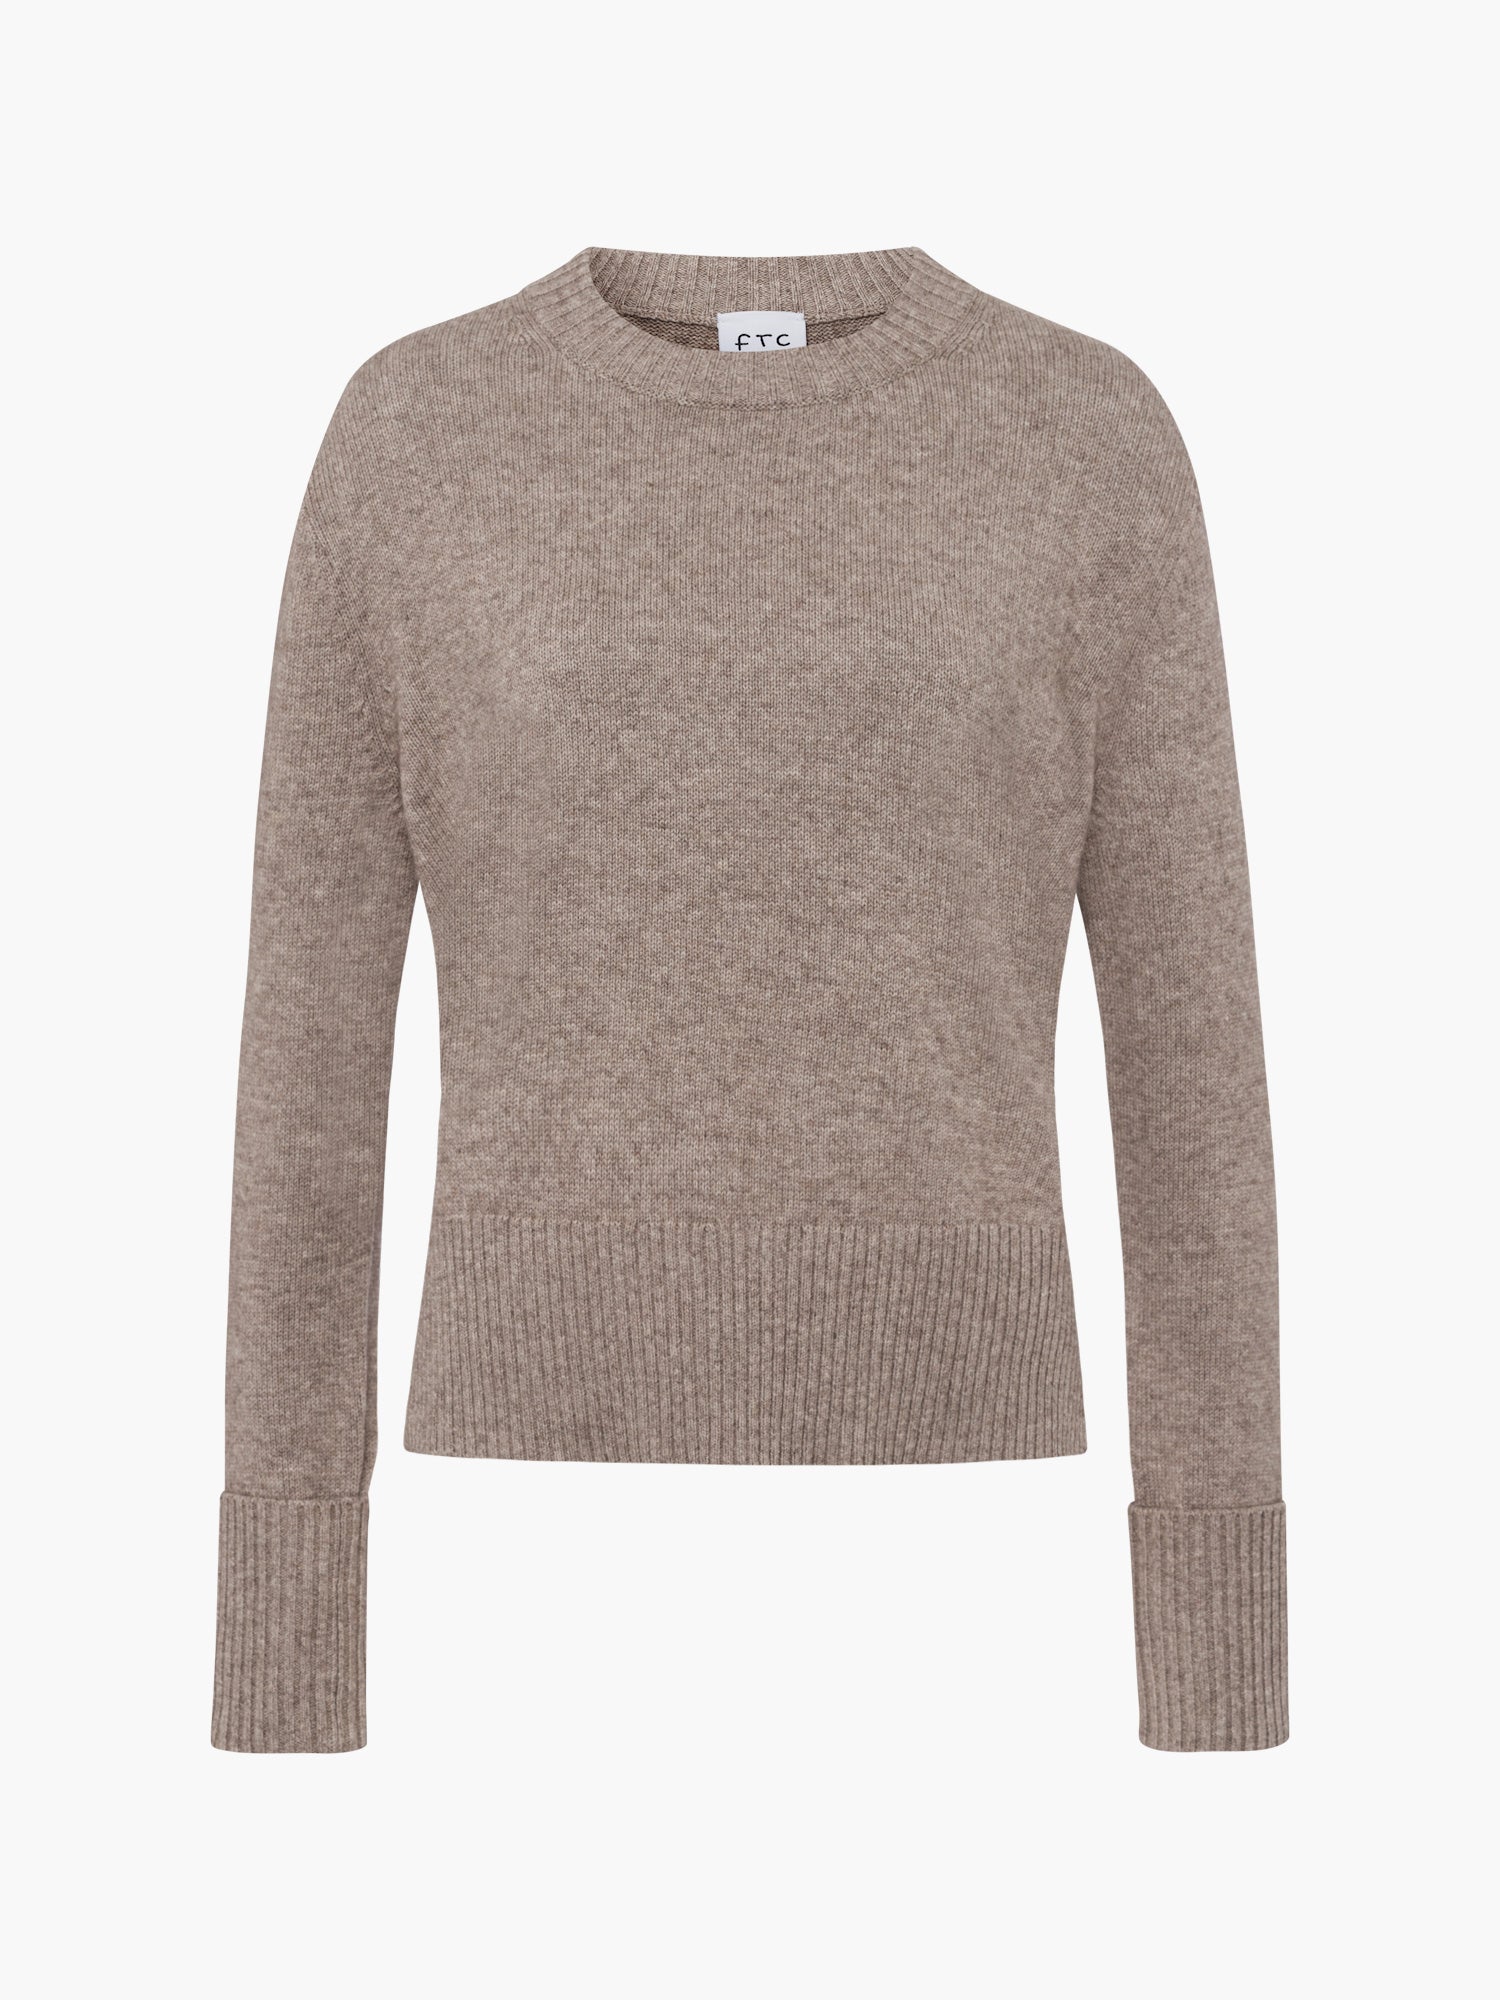 FTC-Cashmere-OUTLET-SALE-Pullover-RN-Strick-ARCHIVE-COLLECTION_cb3f909f-3f50-430b-9f09-cdd0d54b2442.jpg